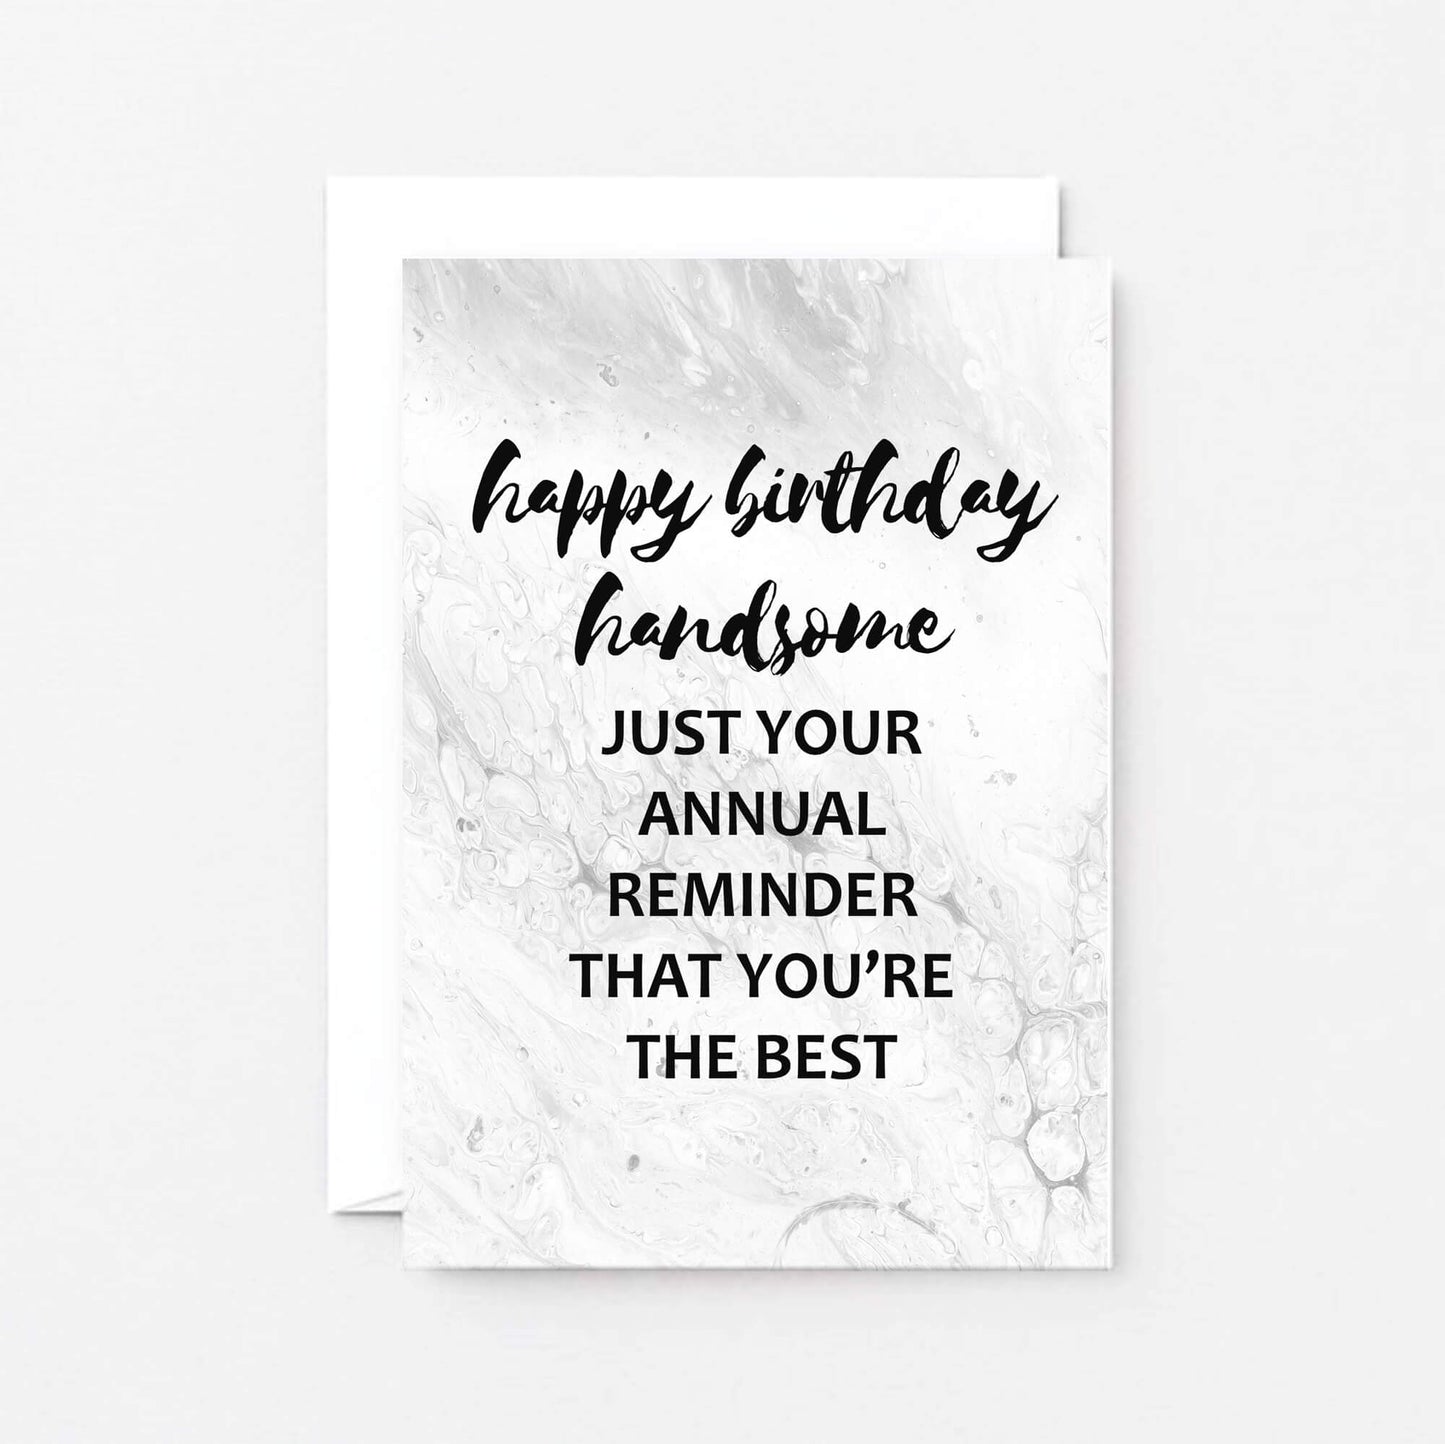 Birthday Card by SixElevenCreations. Reads Happy birthday handsome. Just your annual reminder that you're the best. Product Code SE3011A6